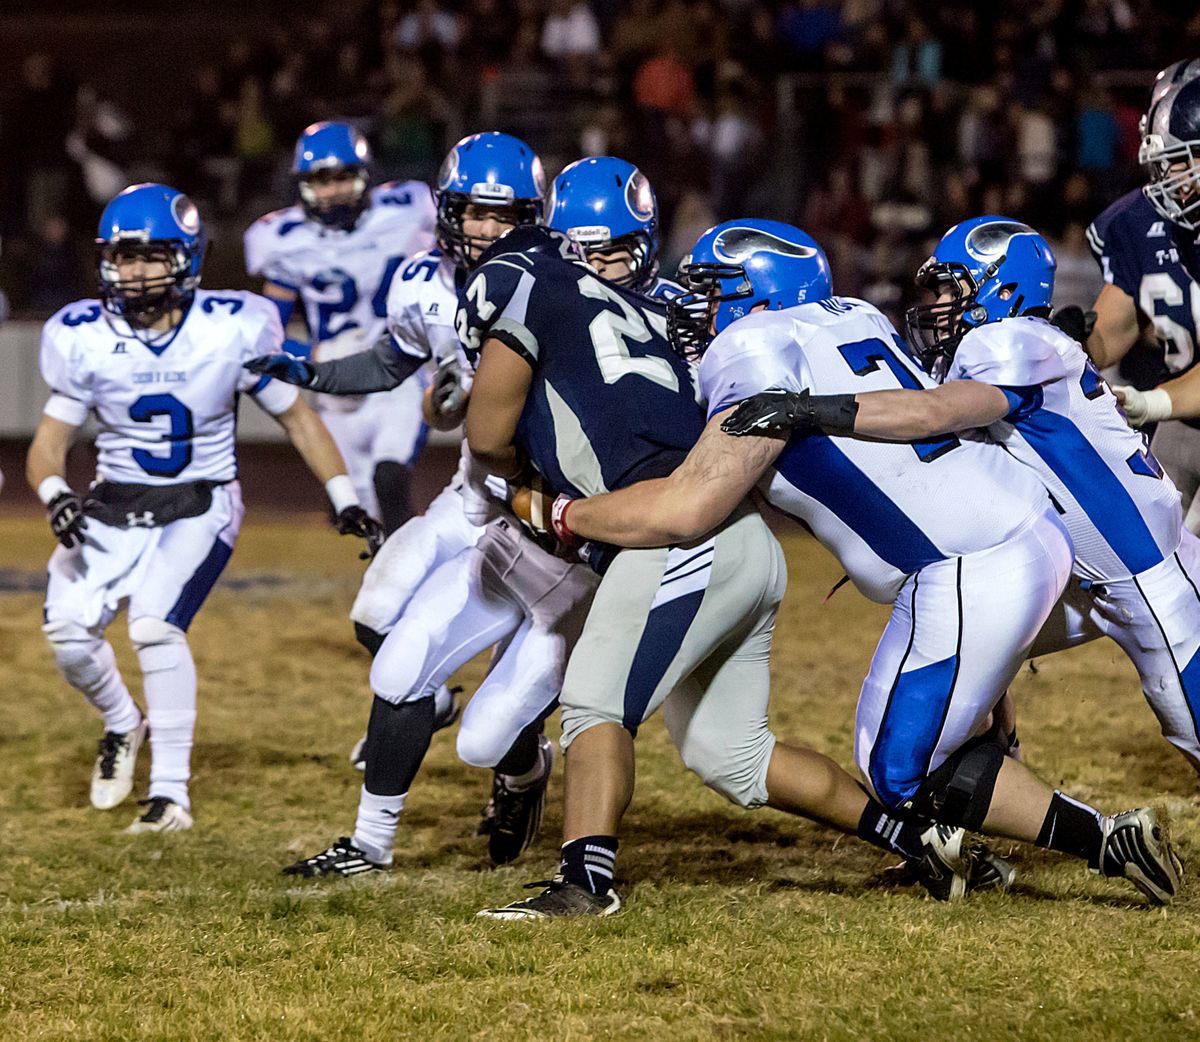 The Coeur d’Alene defense swarms over Lake City’s Gavan Rosteck in the first quarter Friday night at Lake City High School. (BRUCE TWITCHELL)